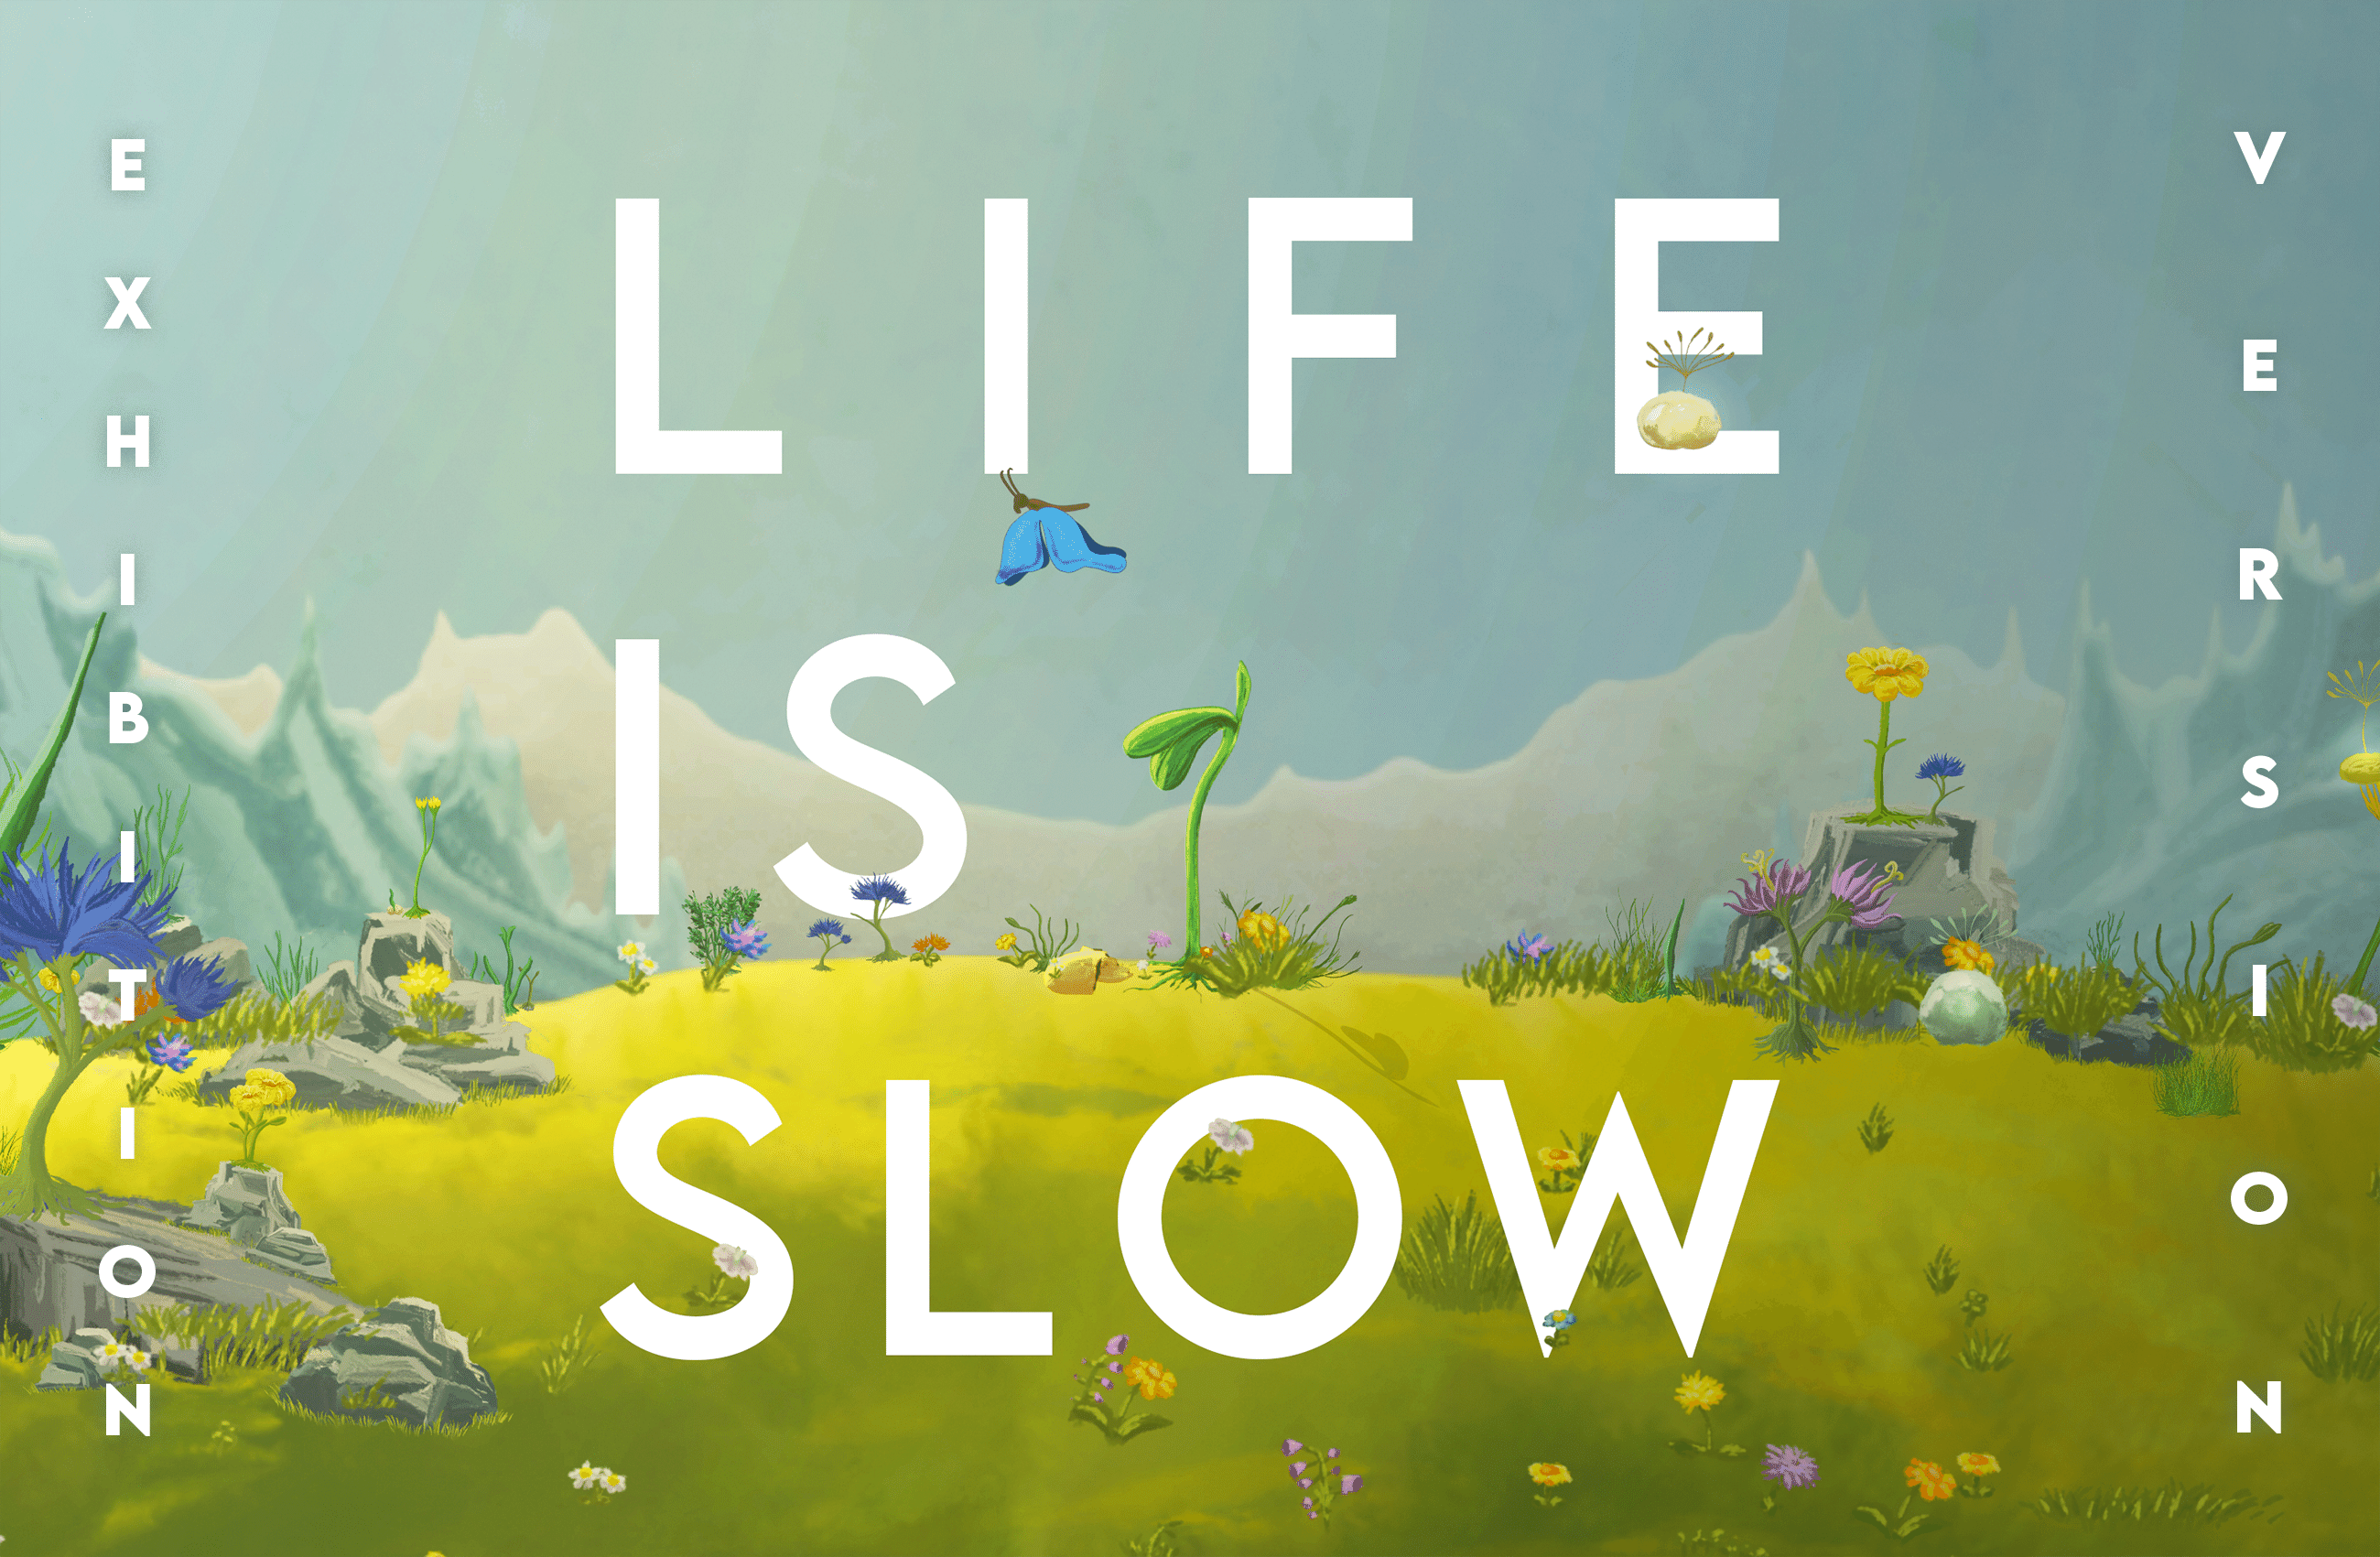 Life is Slow (Exhibition Version)